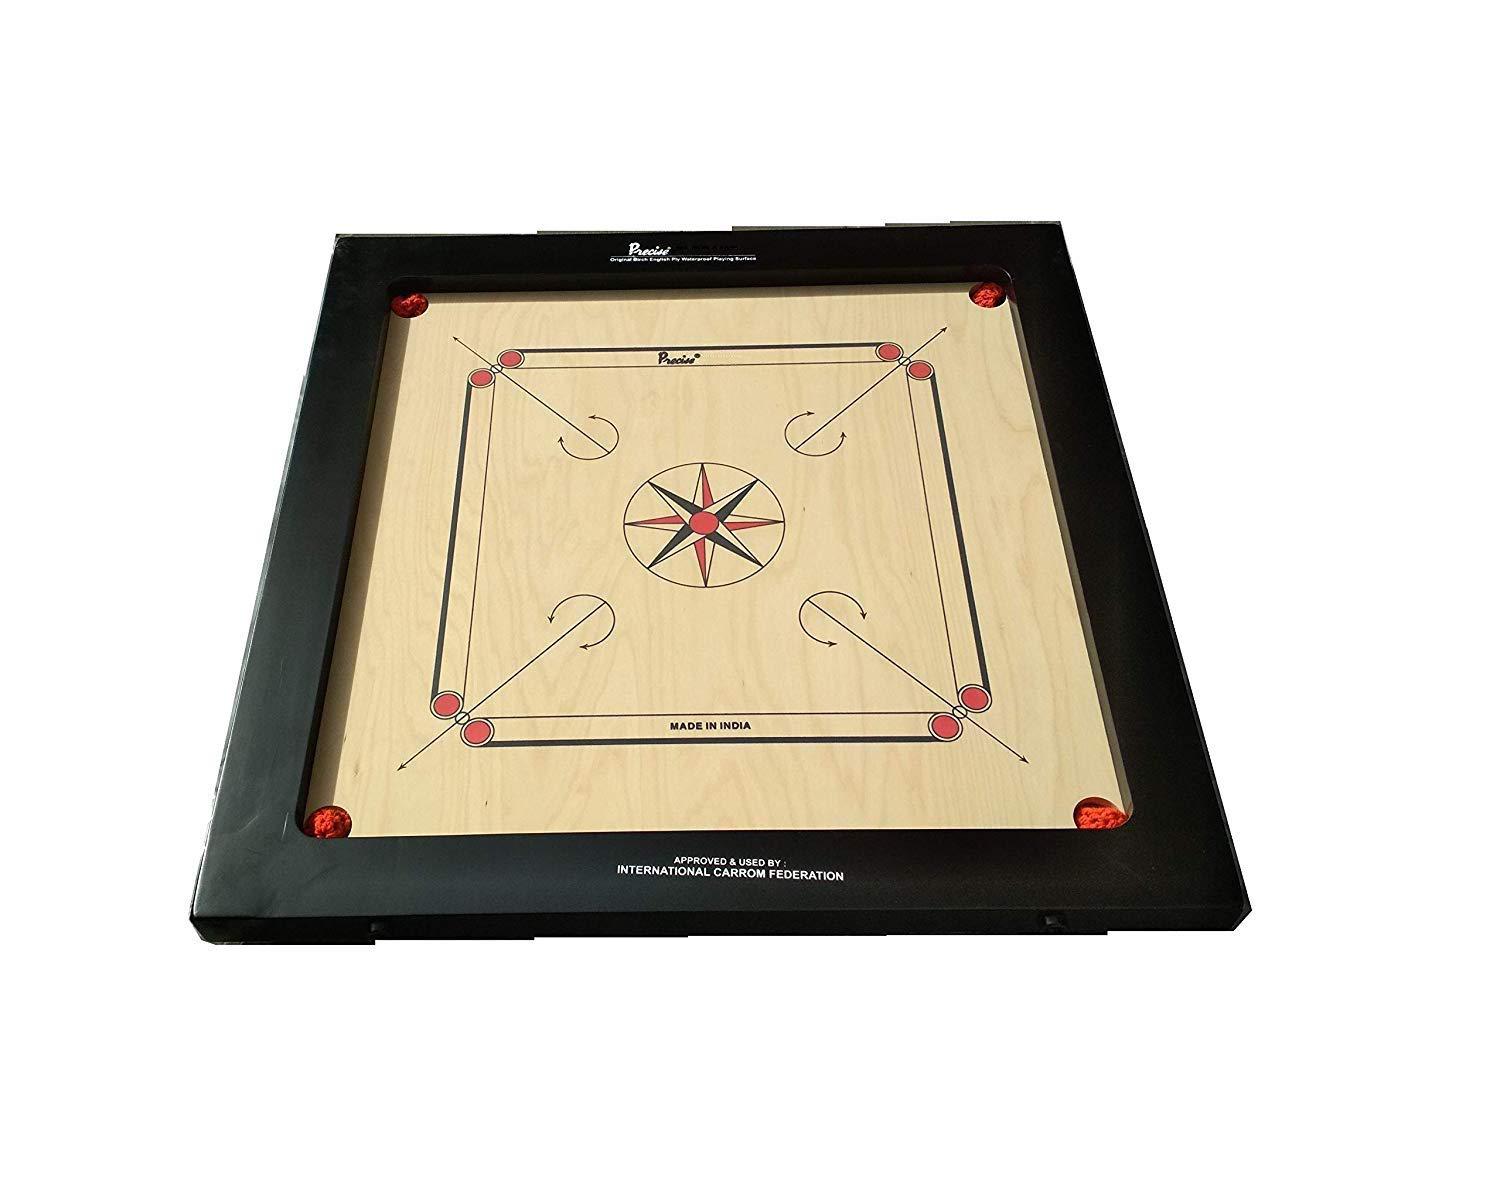 Tabakh precise finest-20mm carrom board with coins, striker, and powder by tabakh